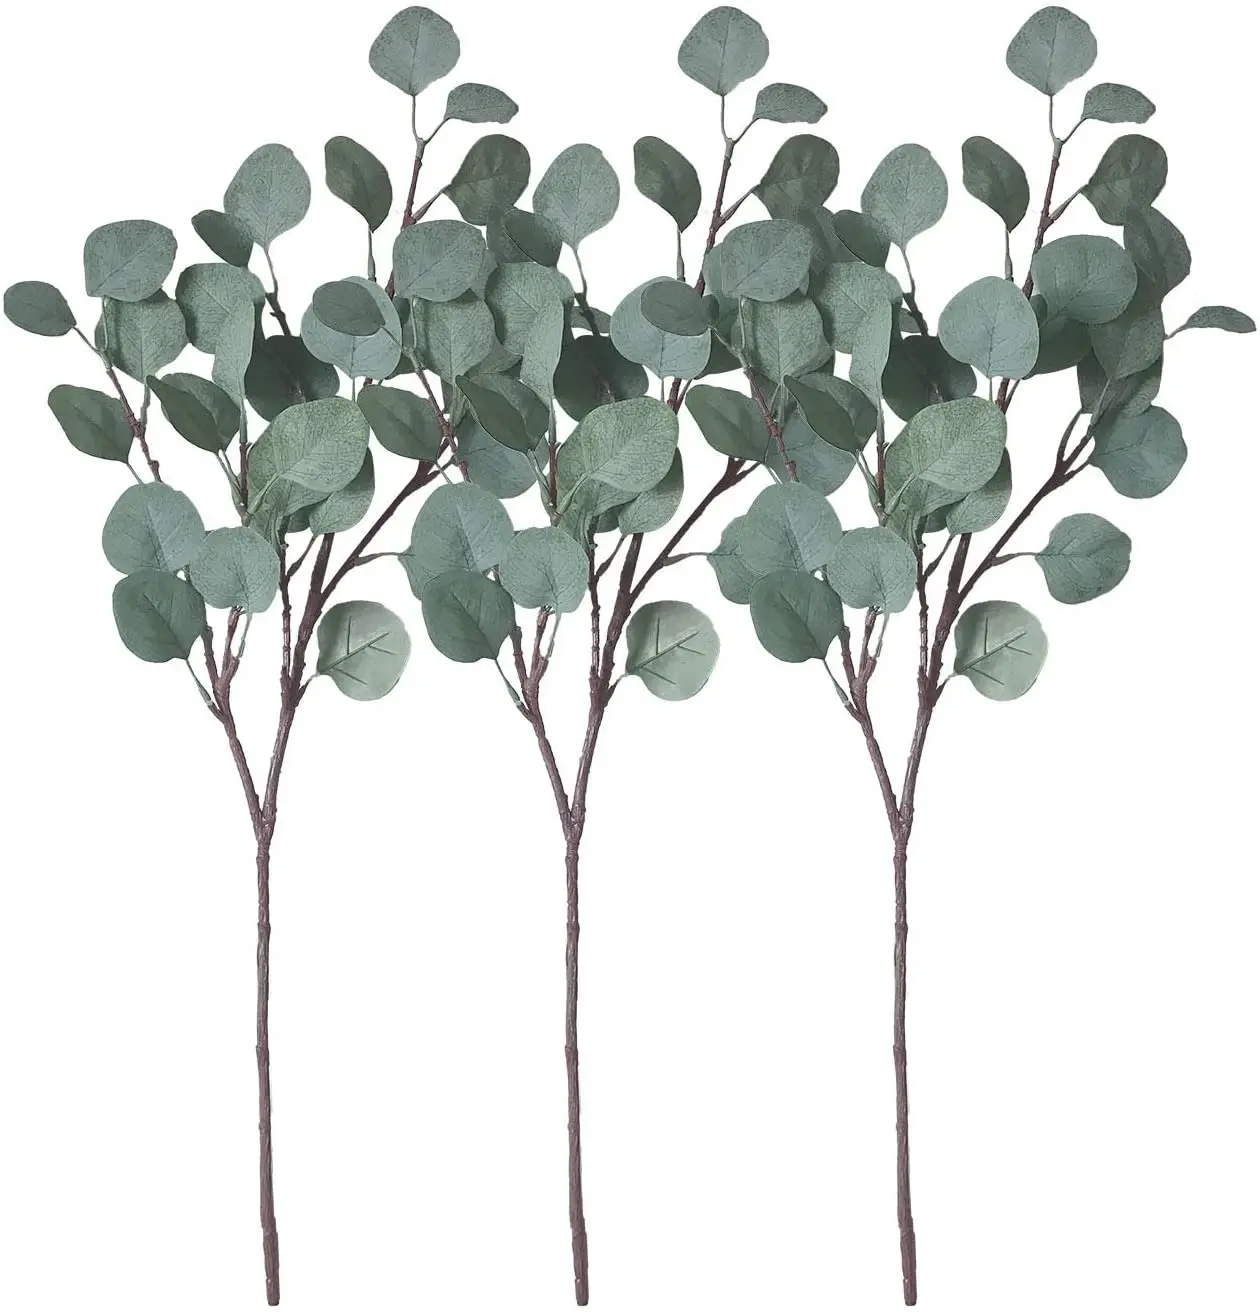 

Artificial Eucalyptus Garland Long Silver Dollar Leaves Foliage Plants Greenery Plastic Branches Greens Bushes, Green